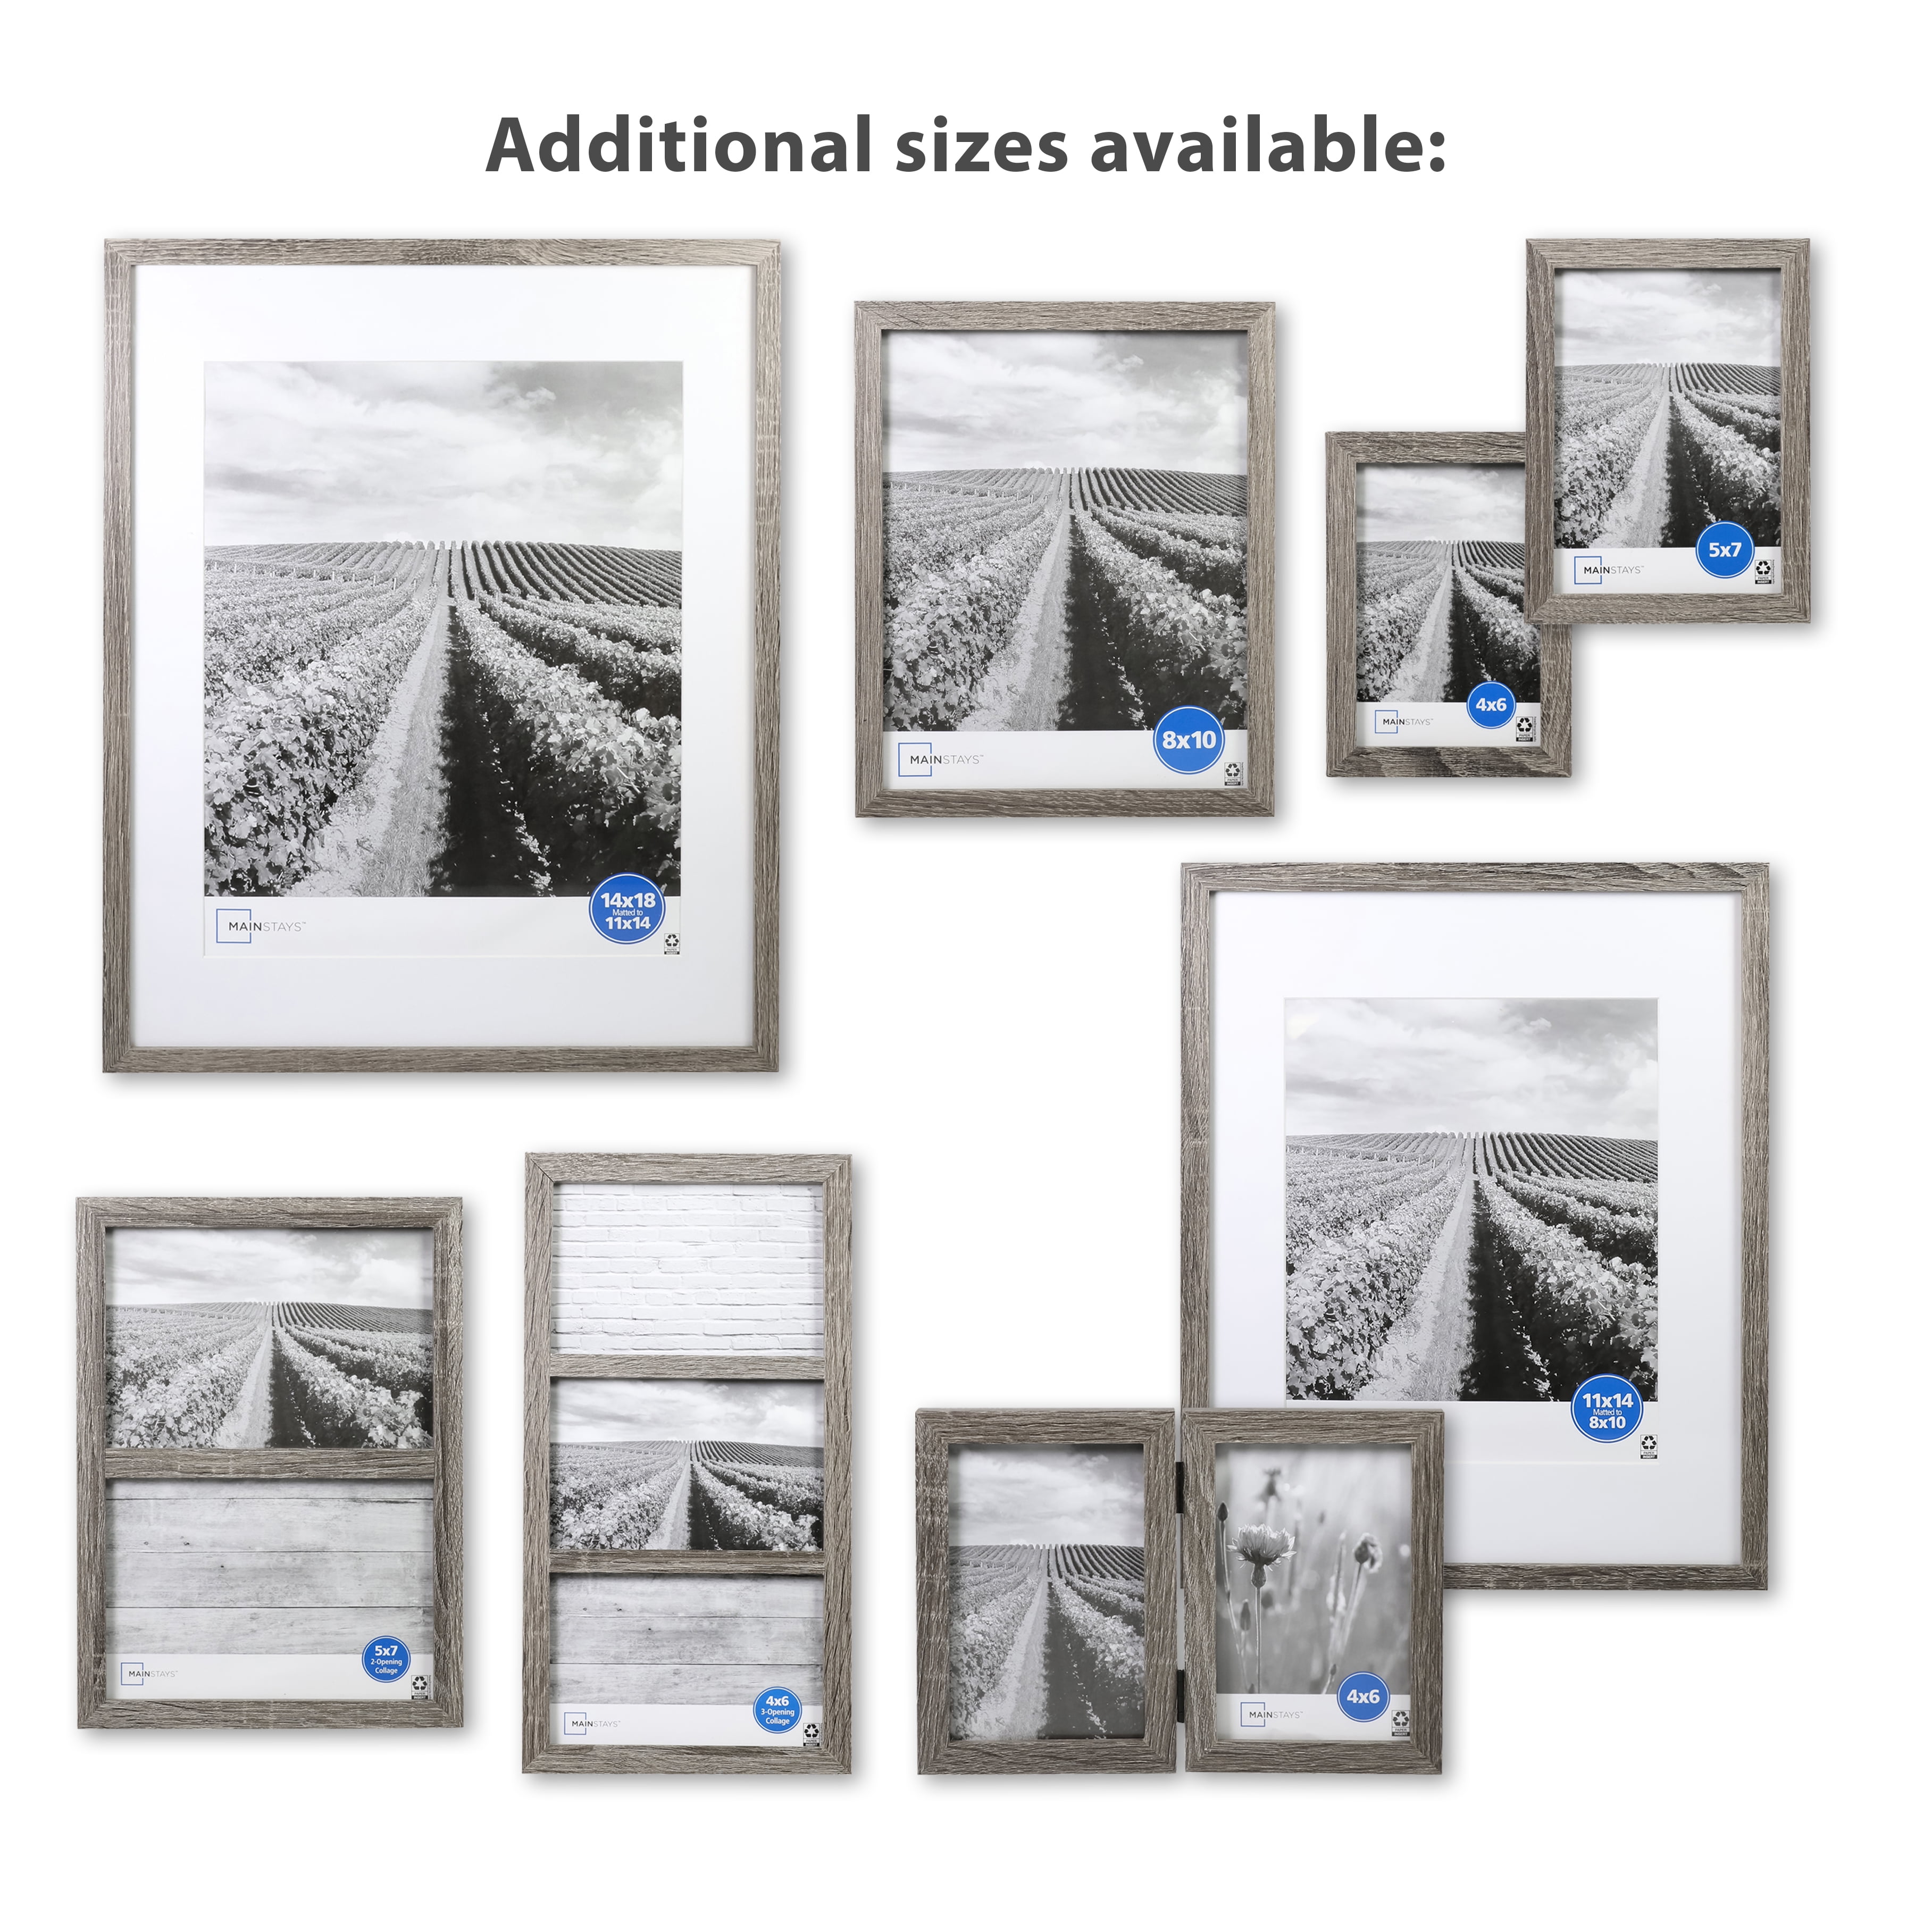 Mainstays 4x6 Linear Gallery Tabletop Picture Frame, White 